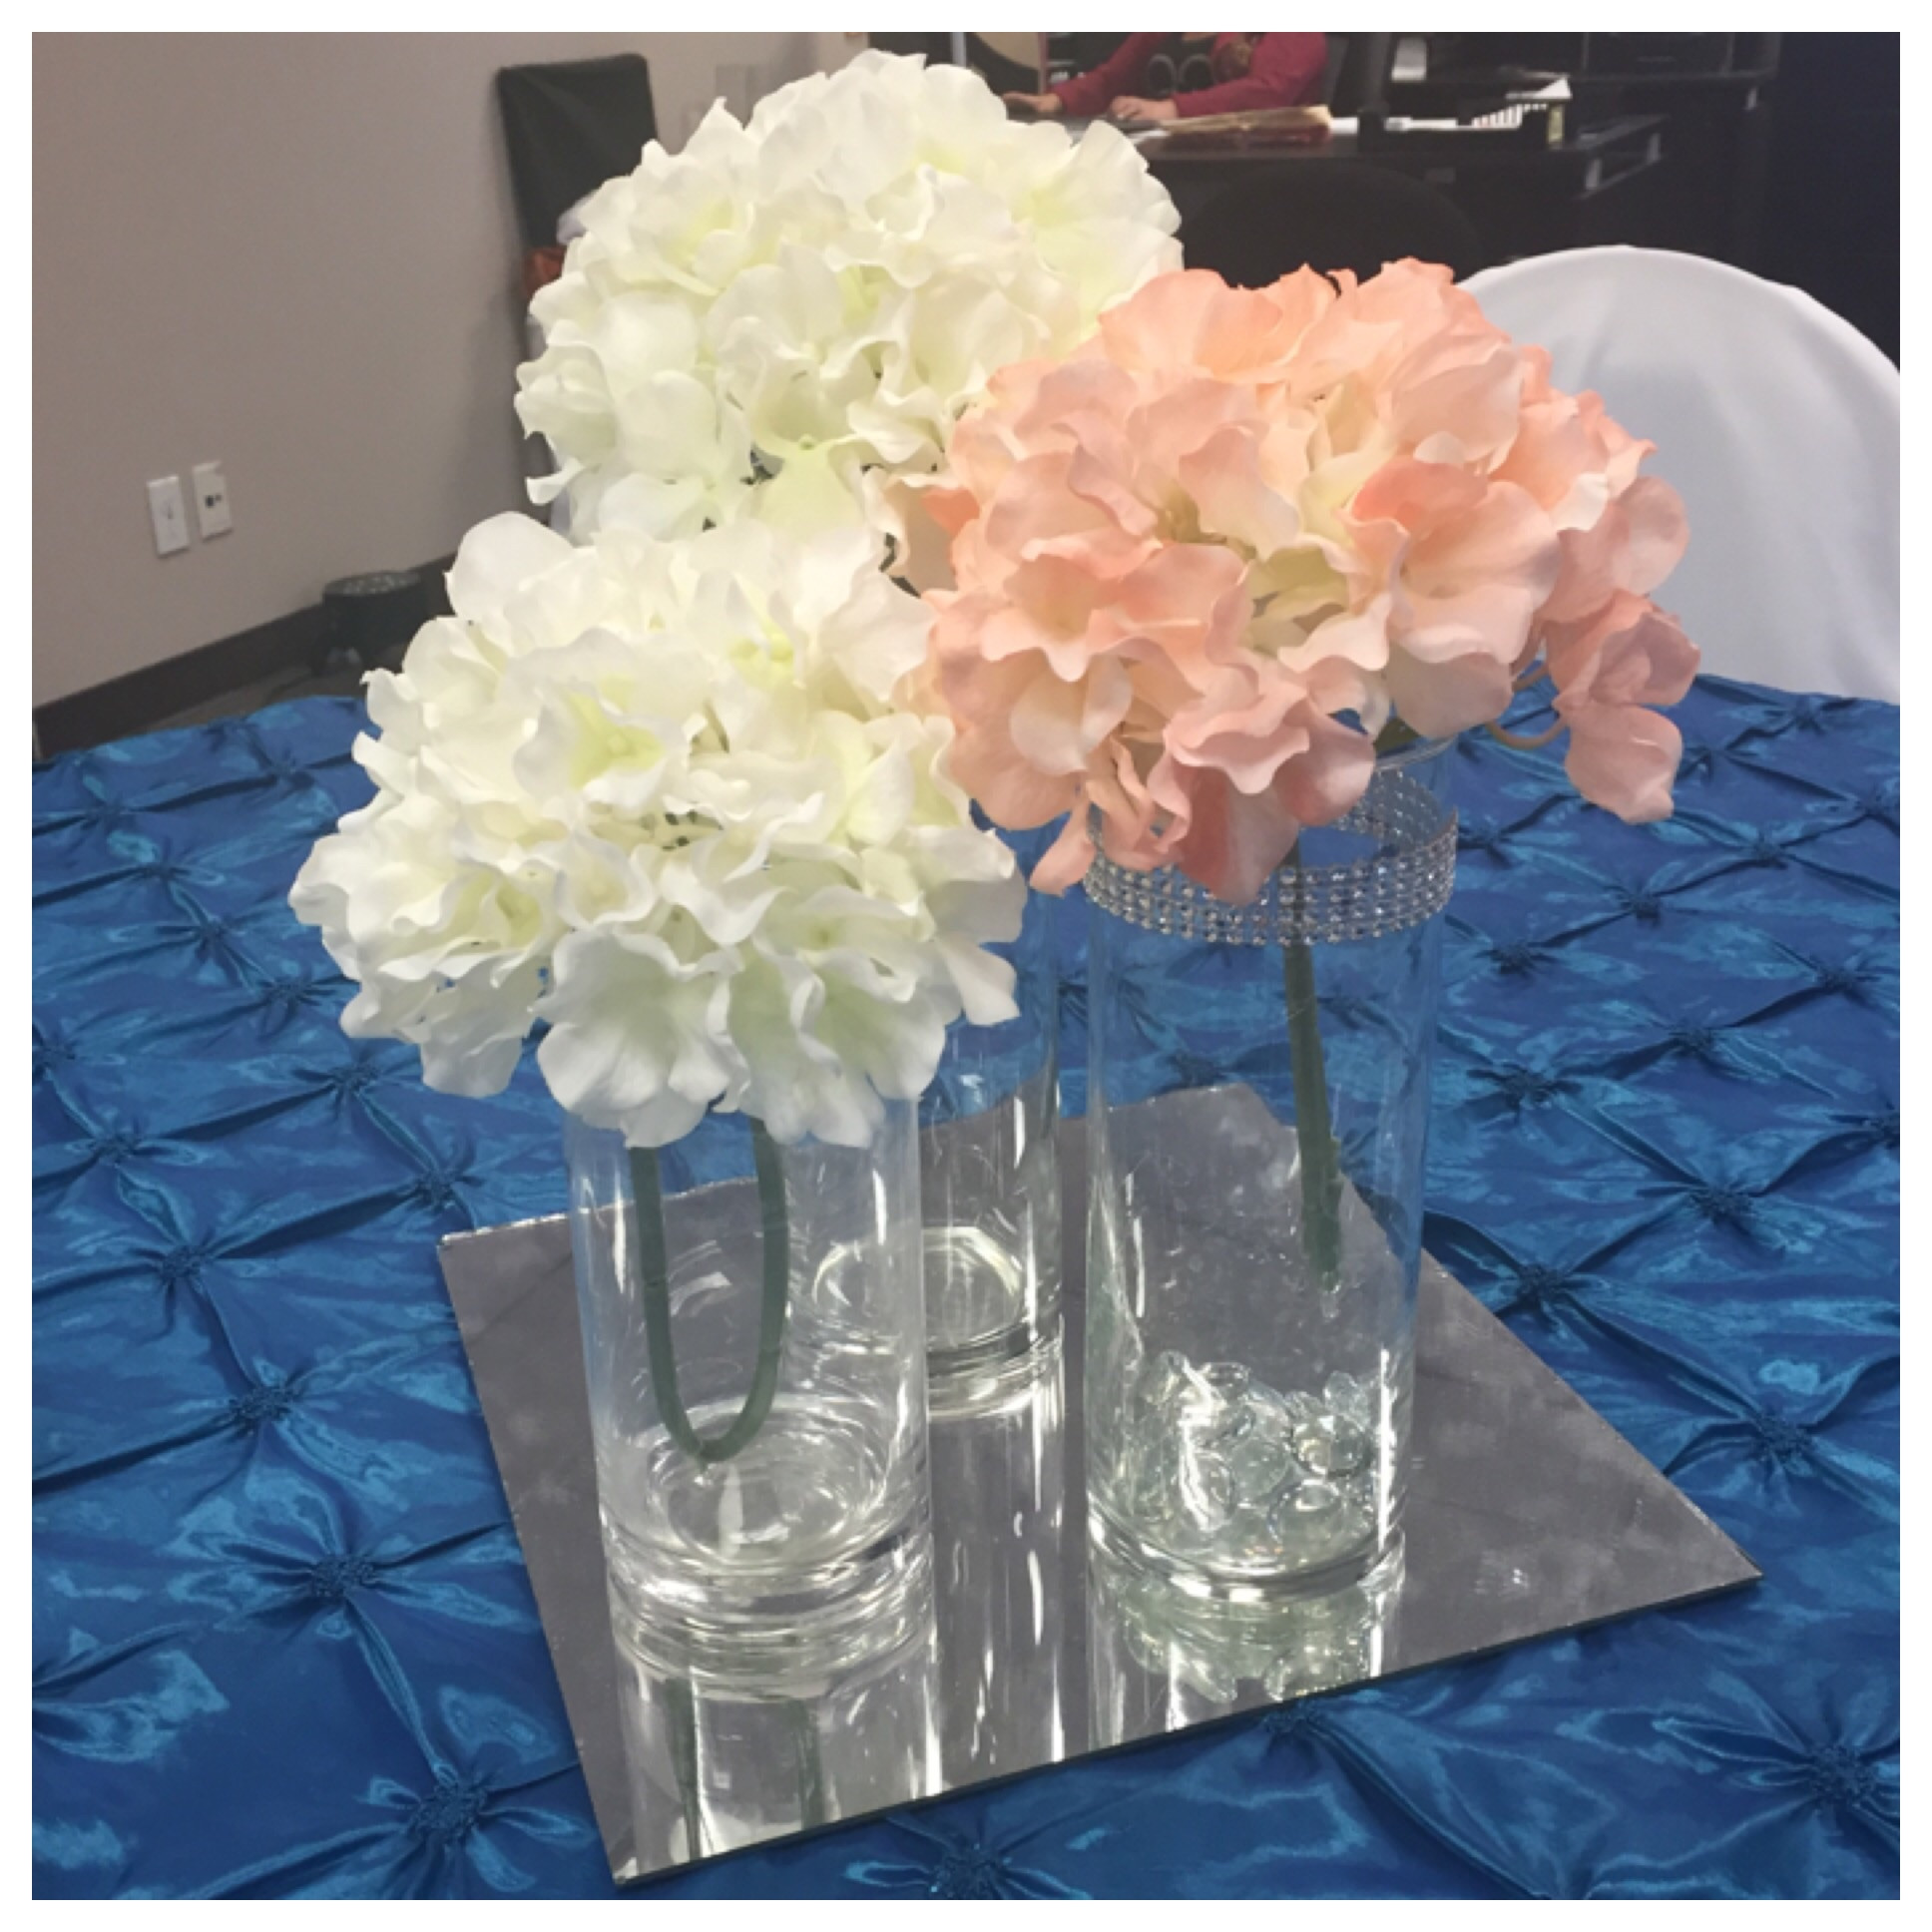 How Much To Spend On Wedding Flowers
 Show me your DIY flower Centerpieces How much did you